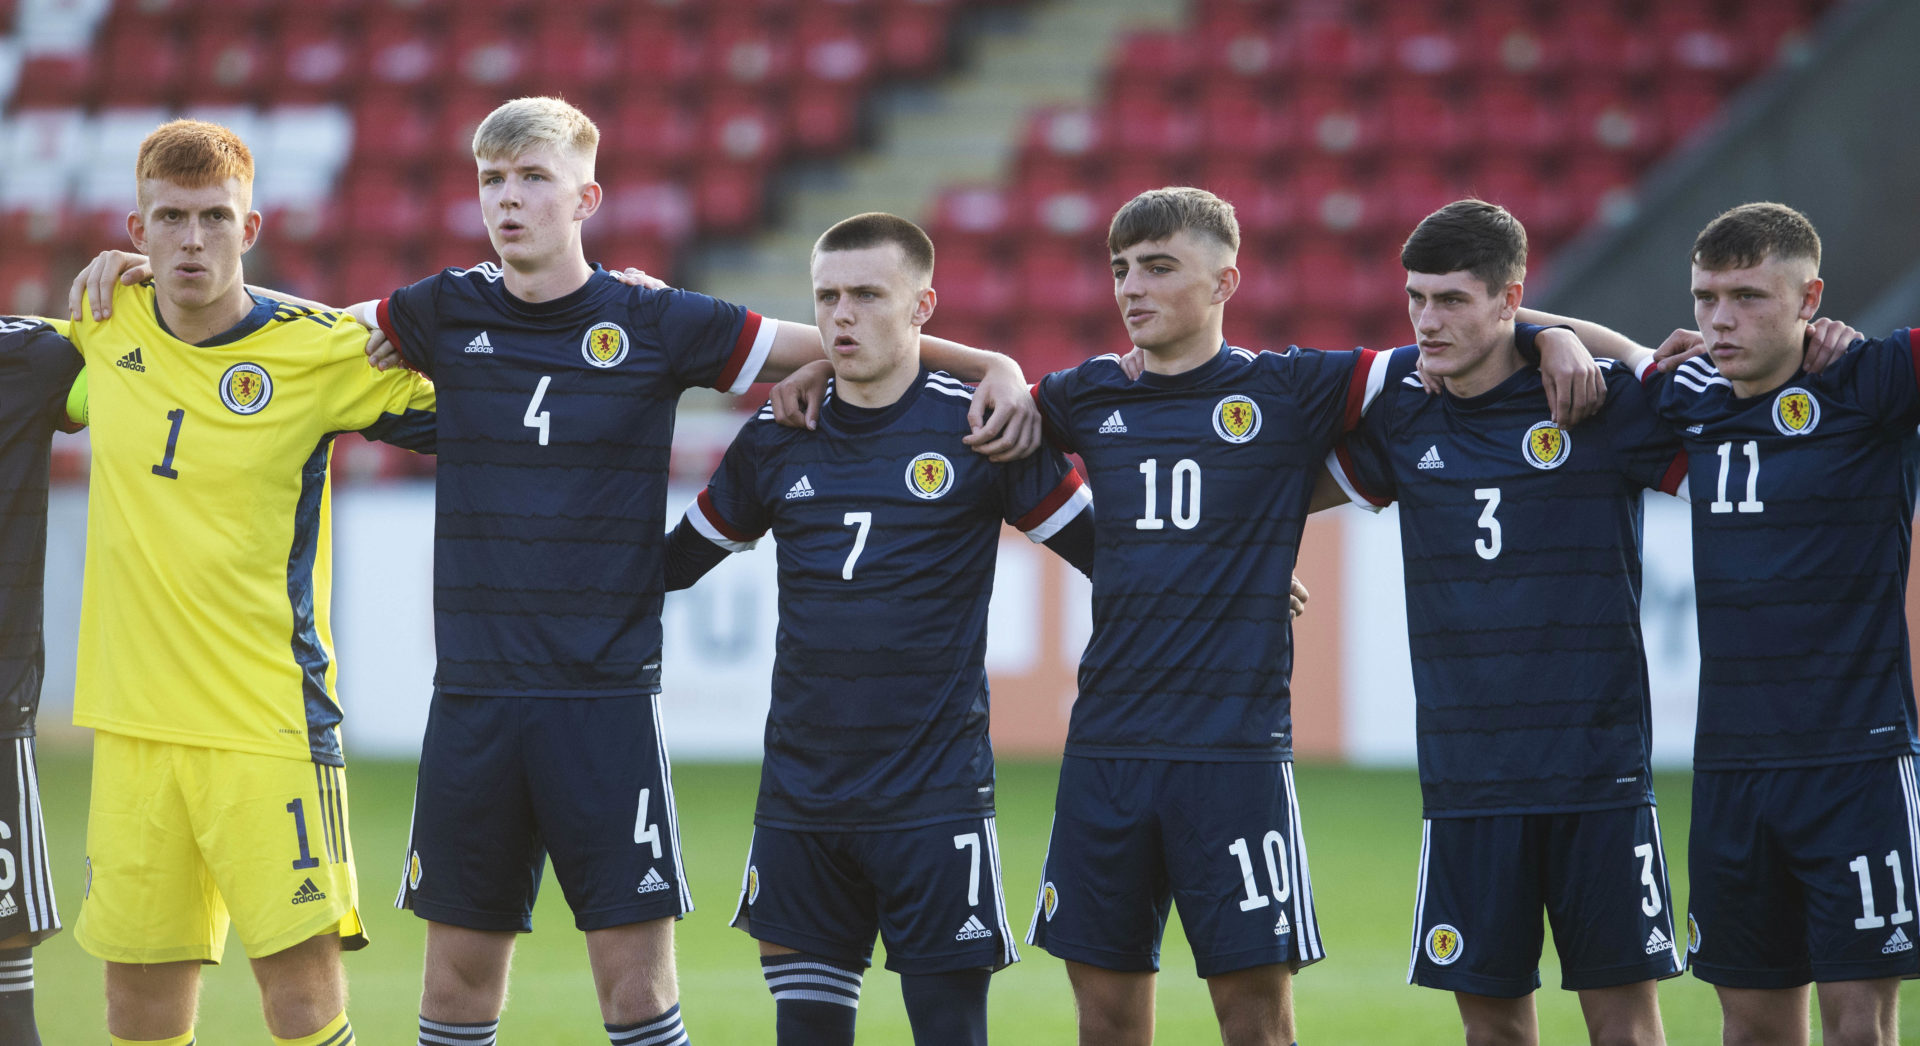 New research suggests foreign signings stunting Scottish youngsters’ growth